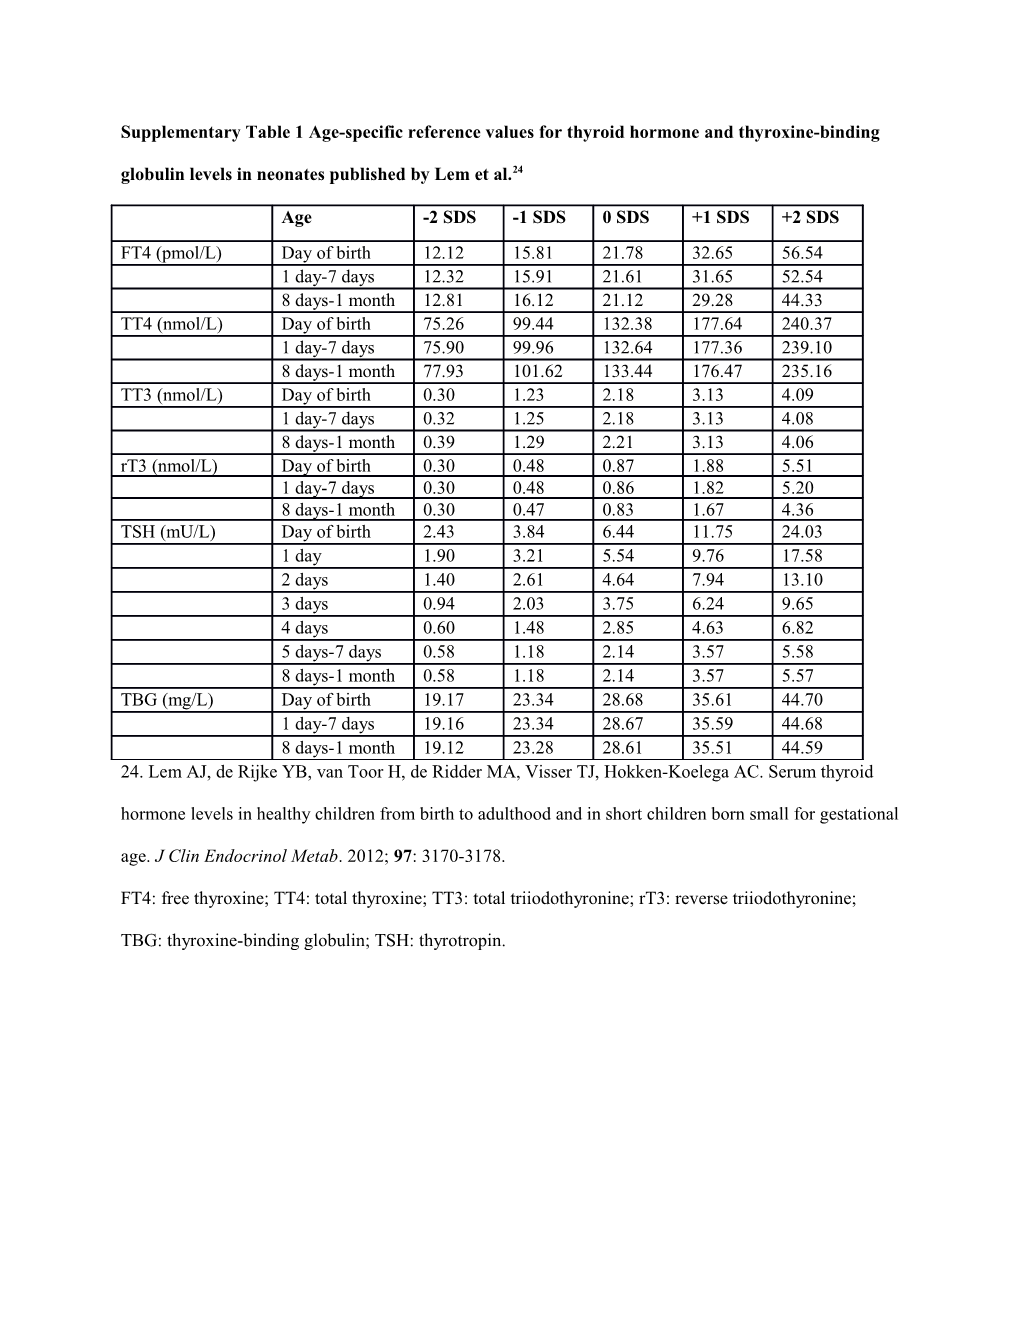 Supplementary Table 1 Age-Specific Reference Values for Thyroid Hormone and Thyroxine-Binding